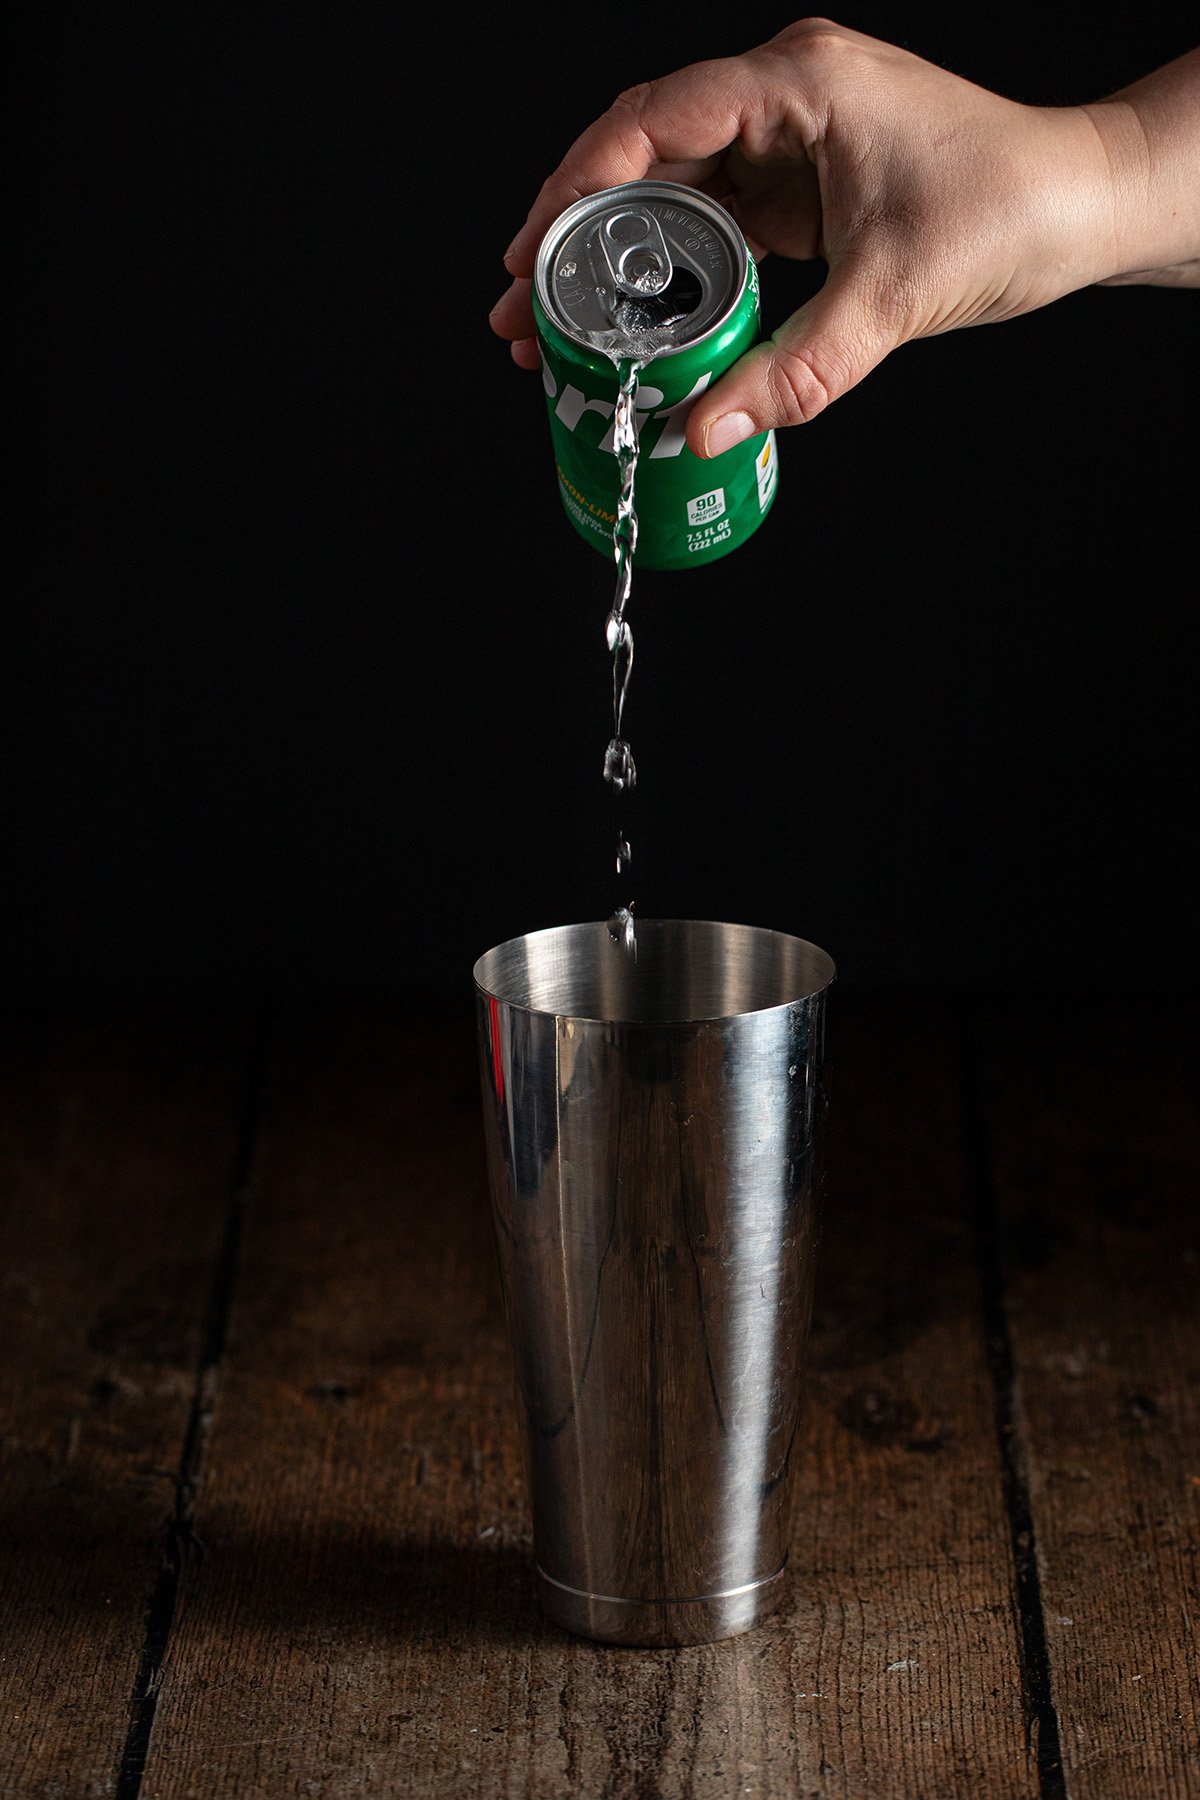 Sprite being poured into a cocktail shaker.